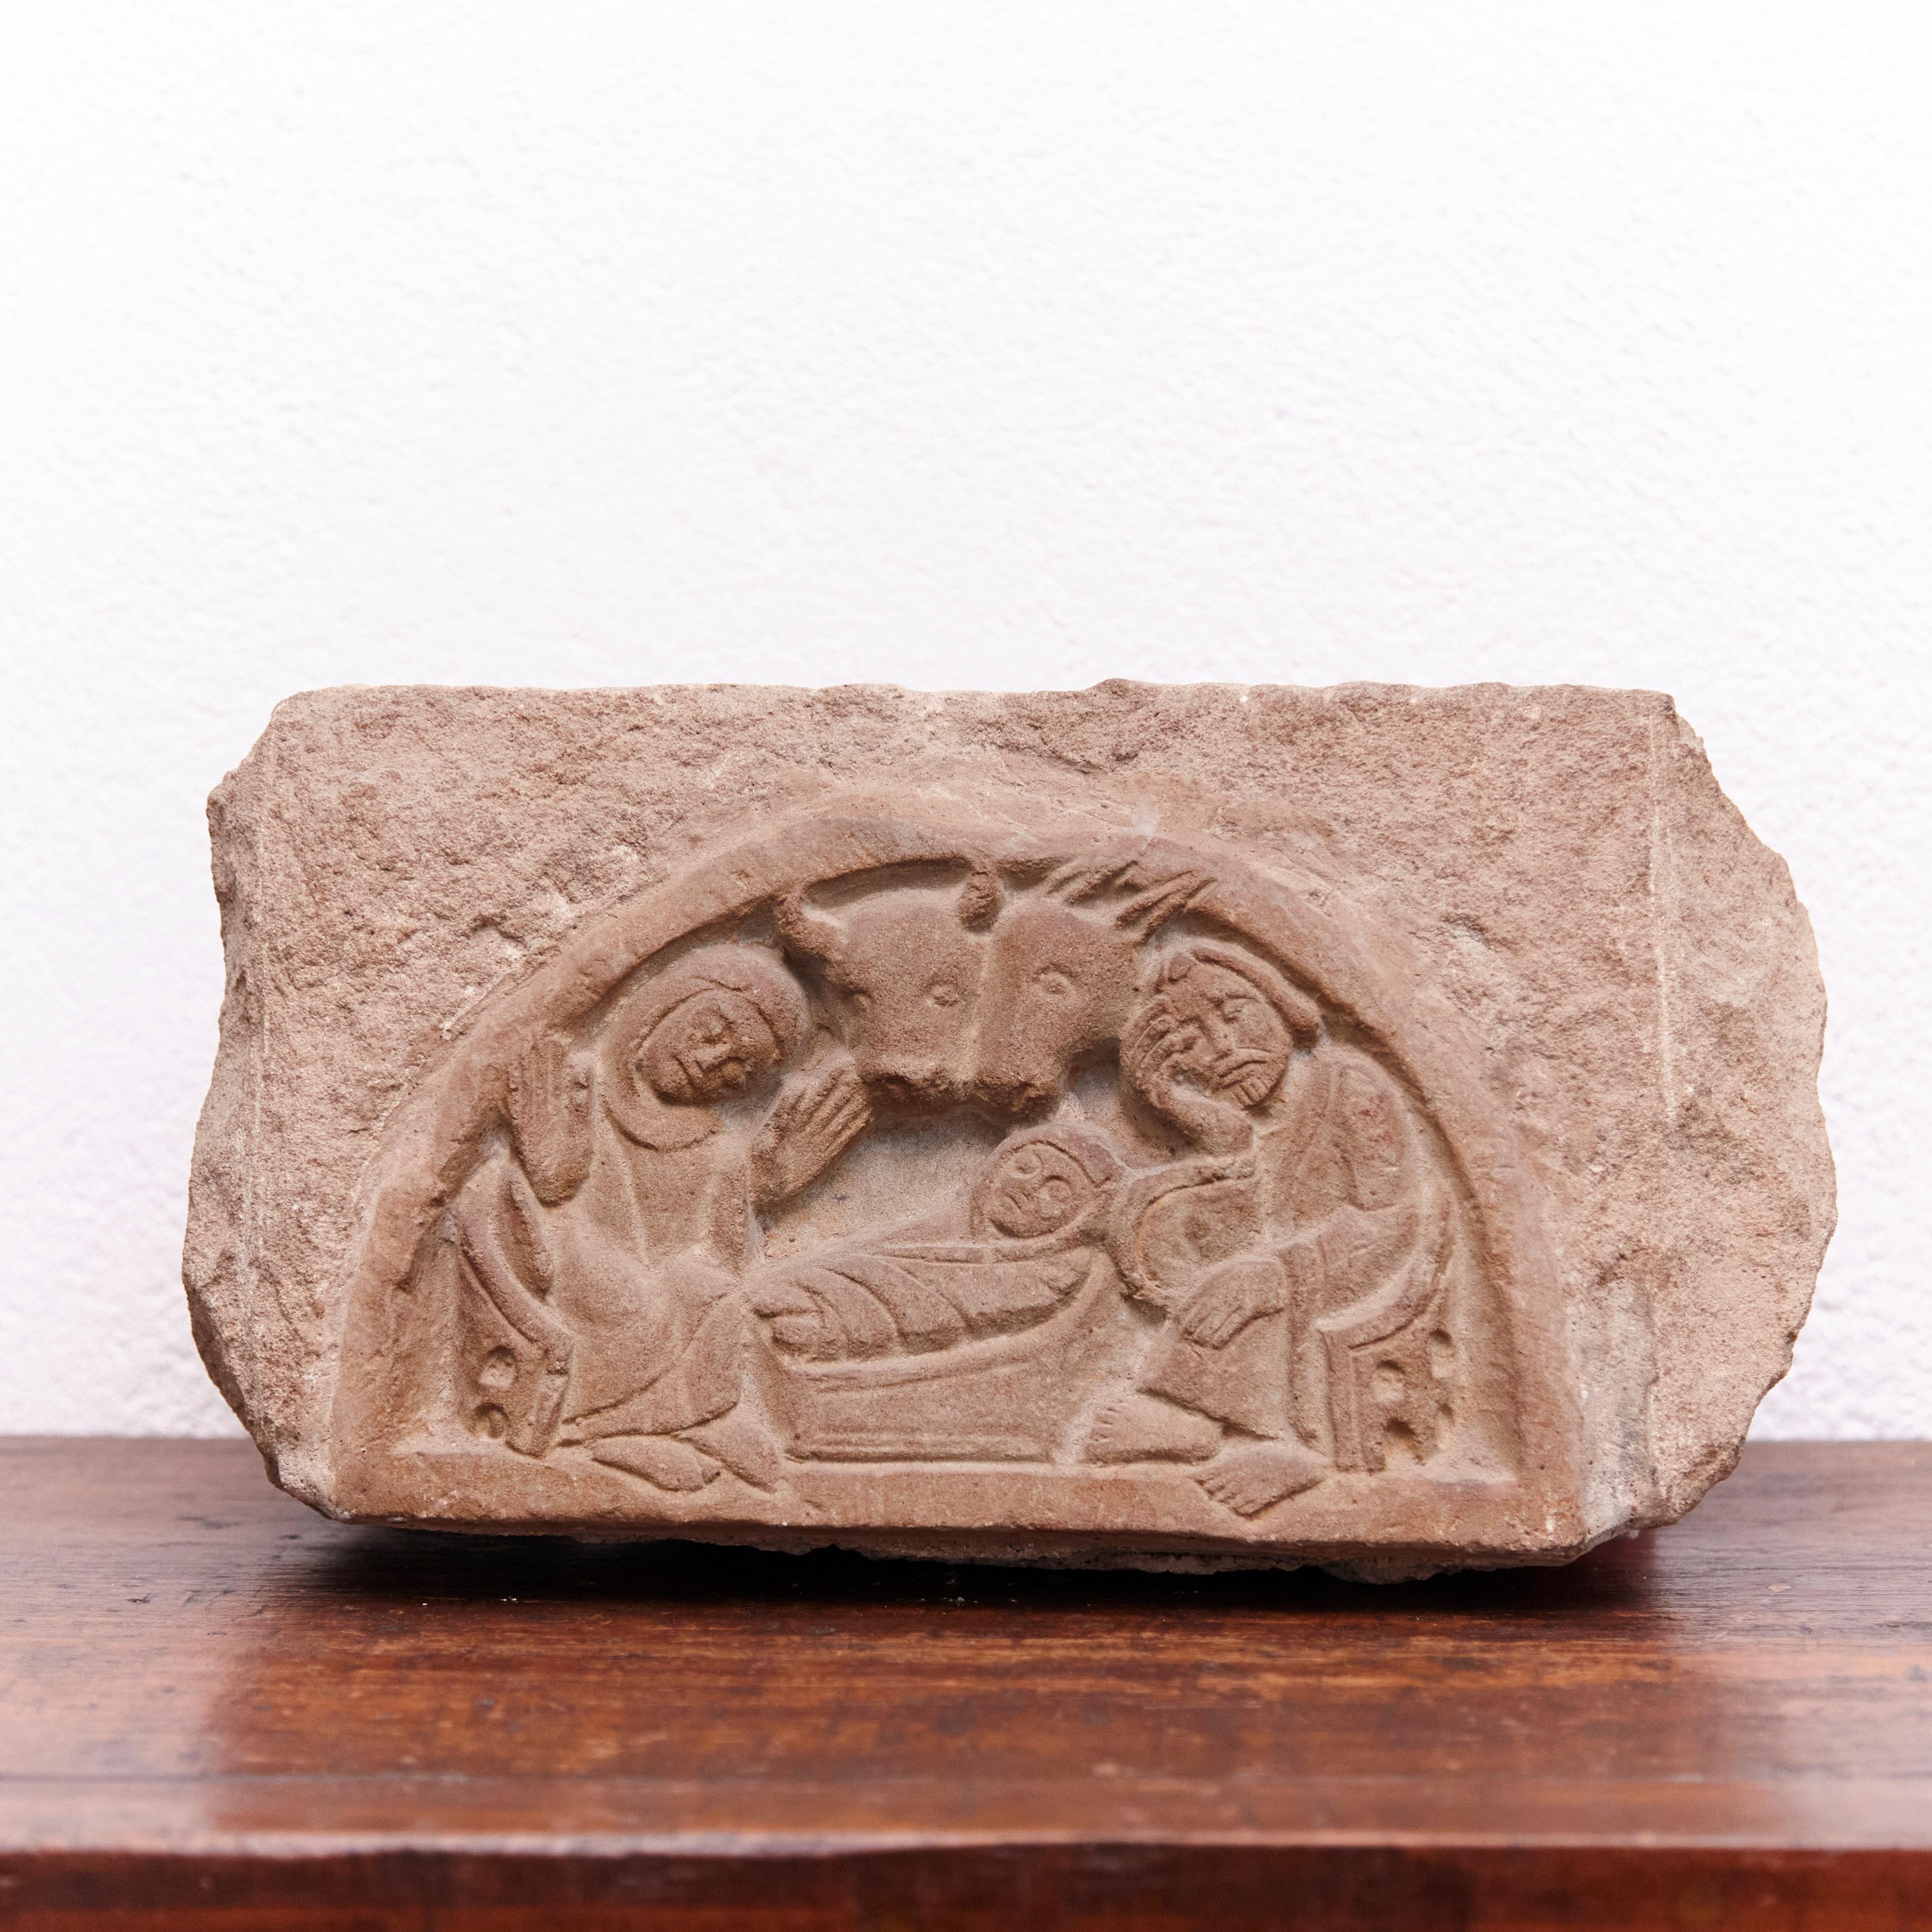 Nativity Engraved Stone Sculpture made by unknown manufactured from Spain circa 1930

In original condition, with minor wear consistent with age and use.